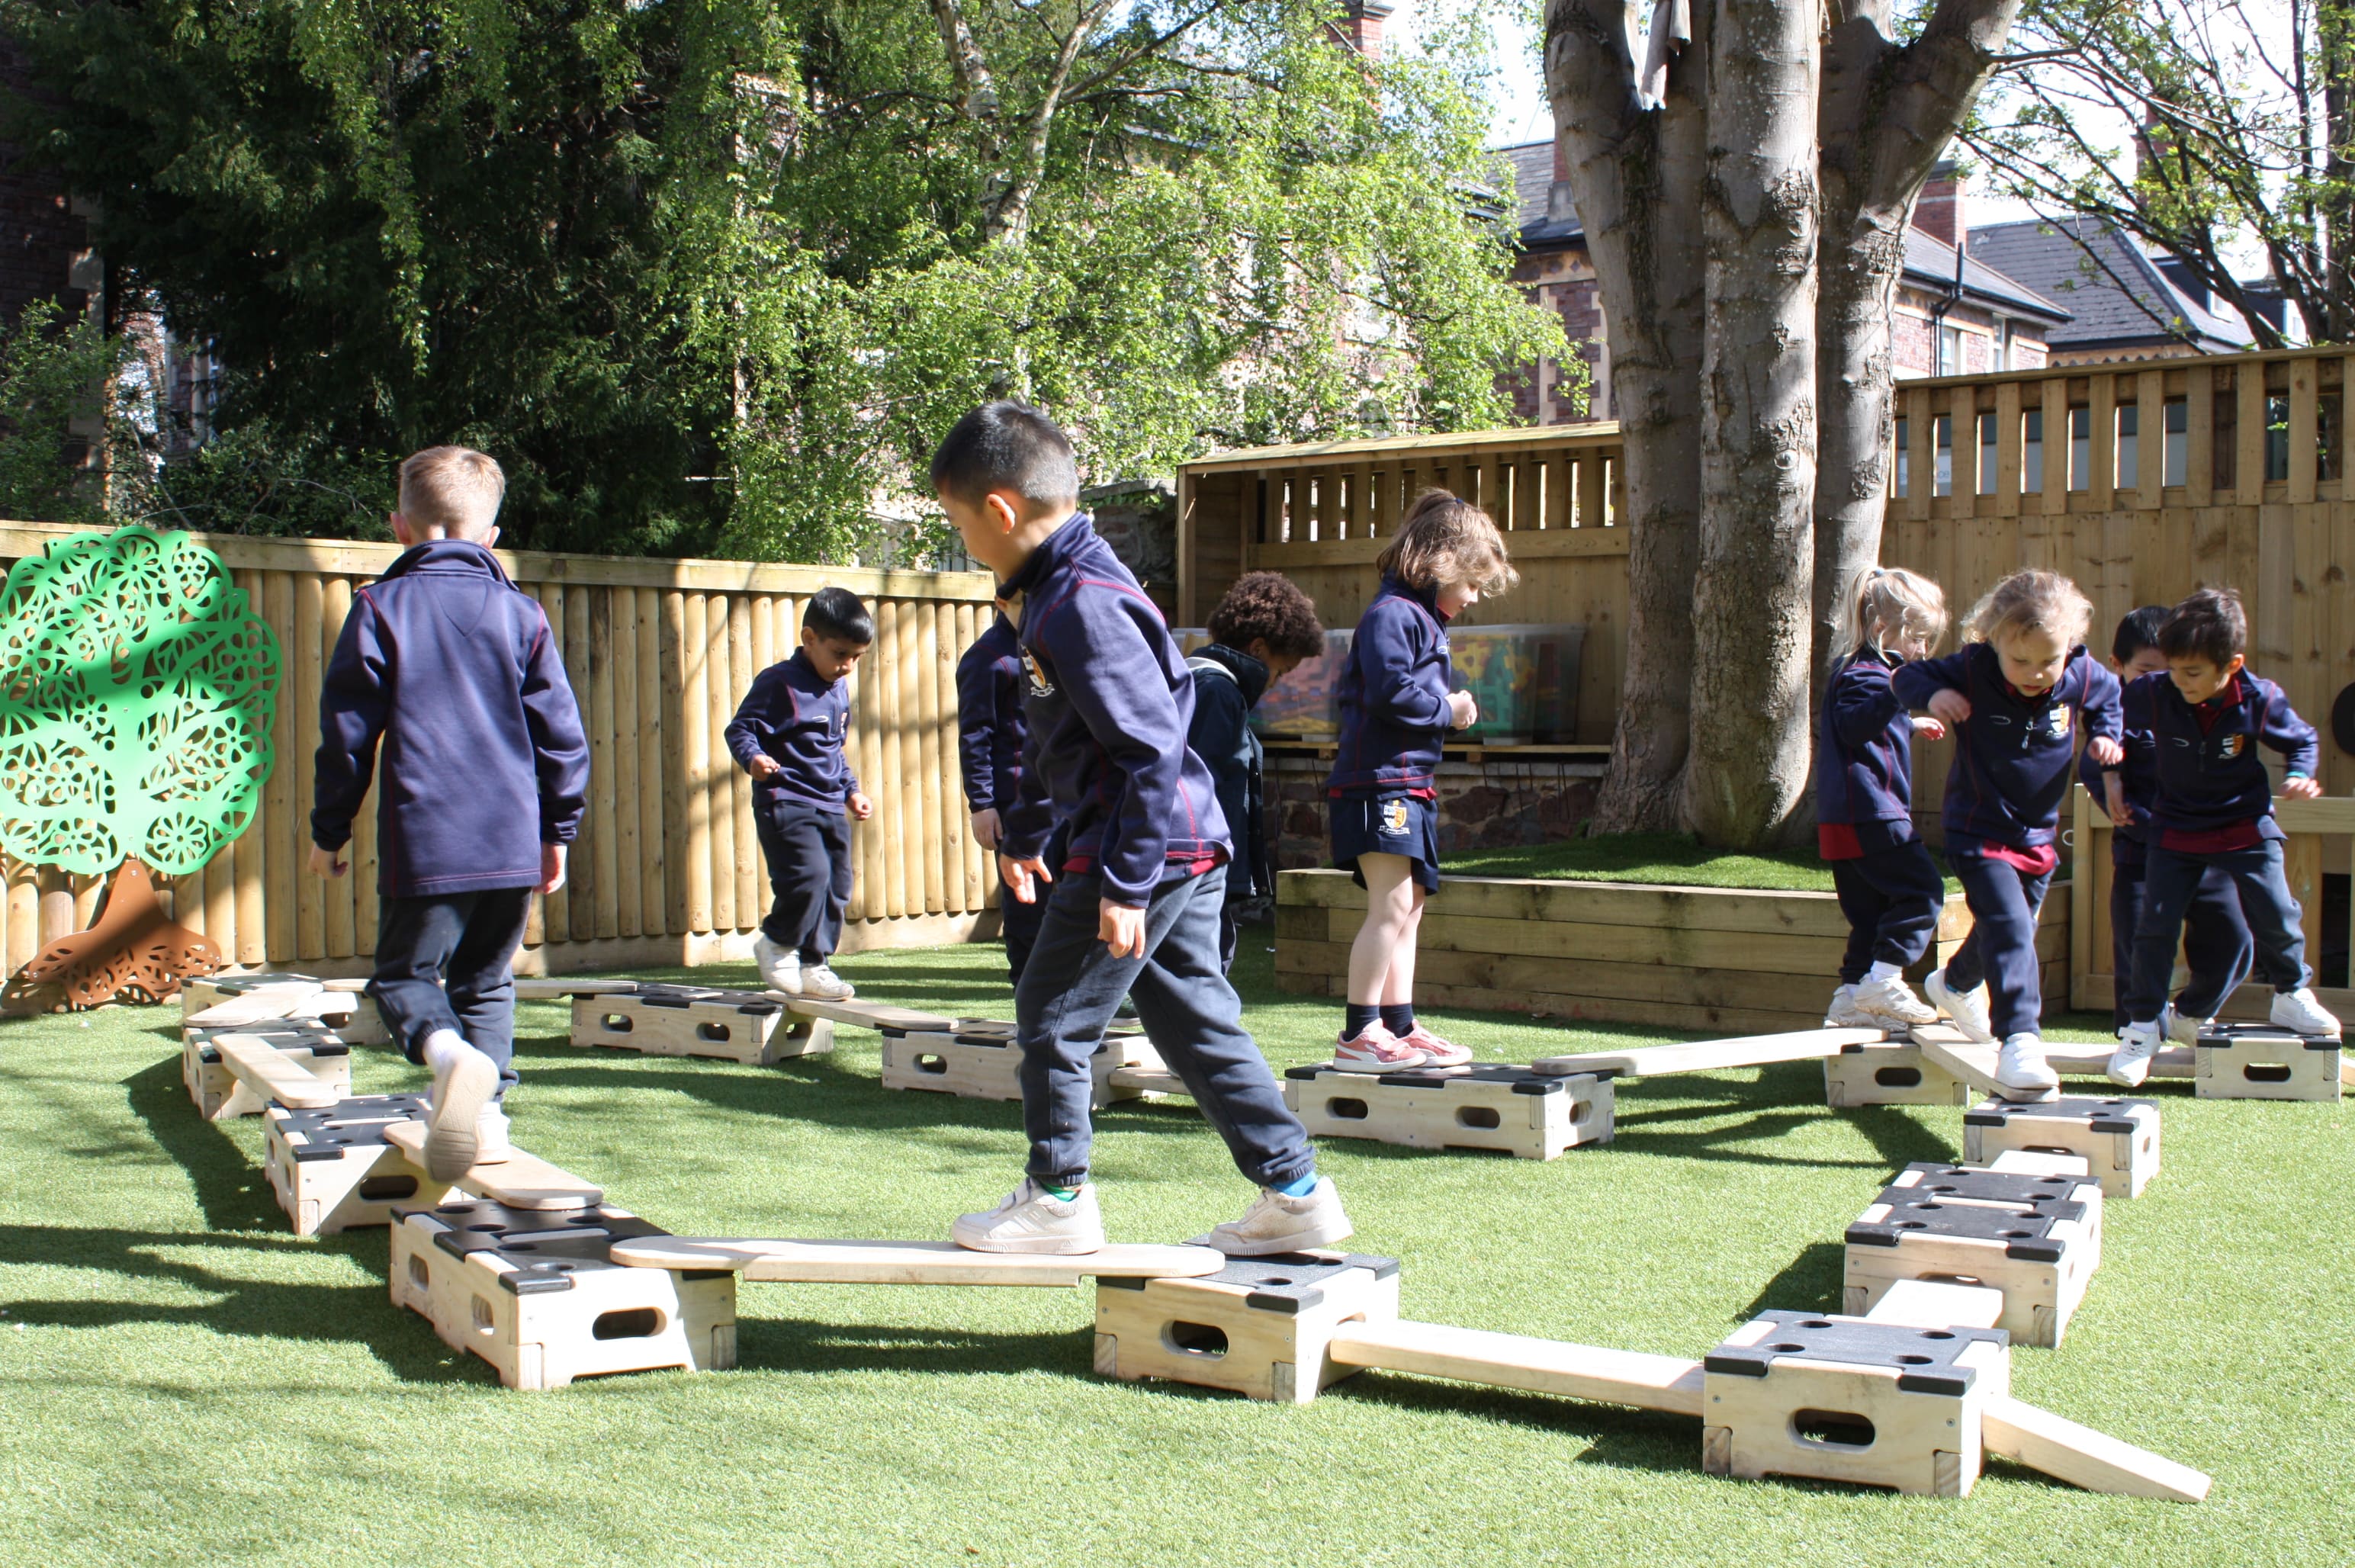 A group of children are walking around on the Play Builder Engineer Set, trying to complete the obstacle course they have created. The set is made up from wooden planks and wooden blocks.